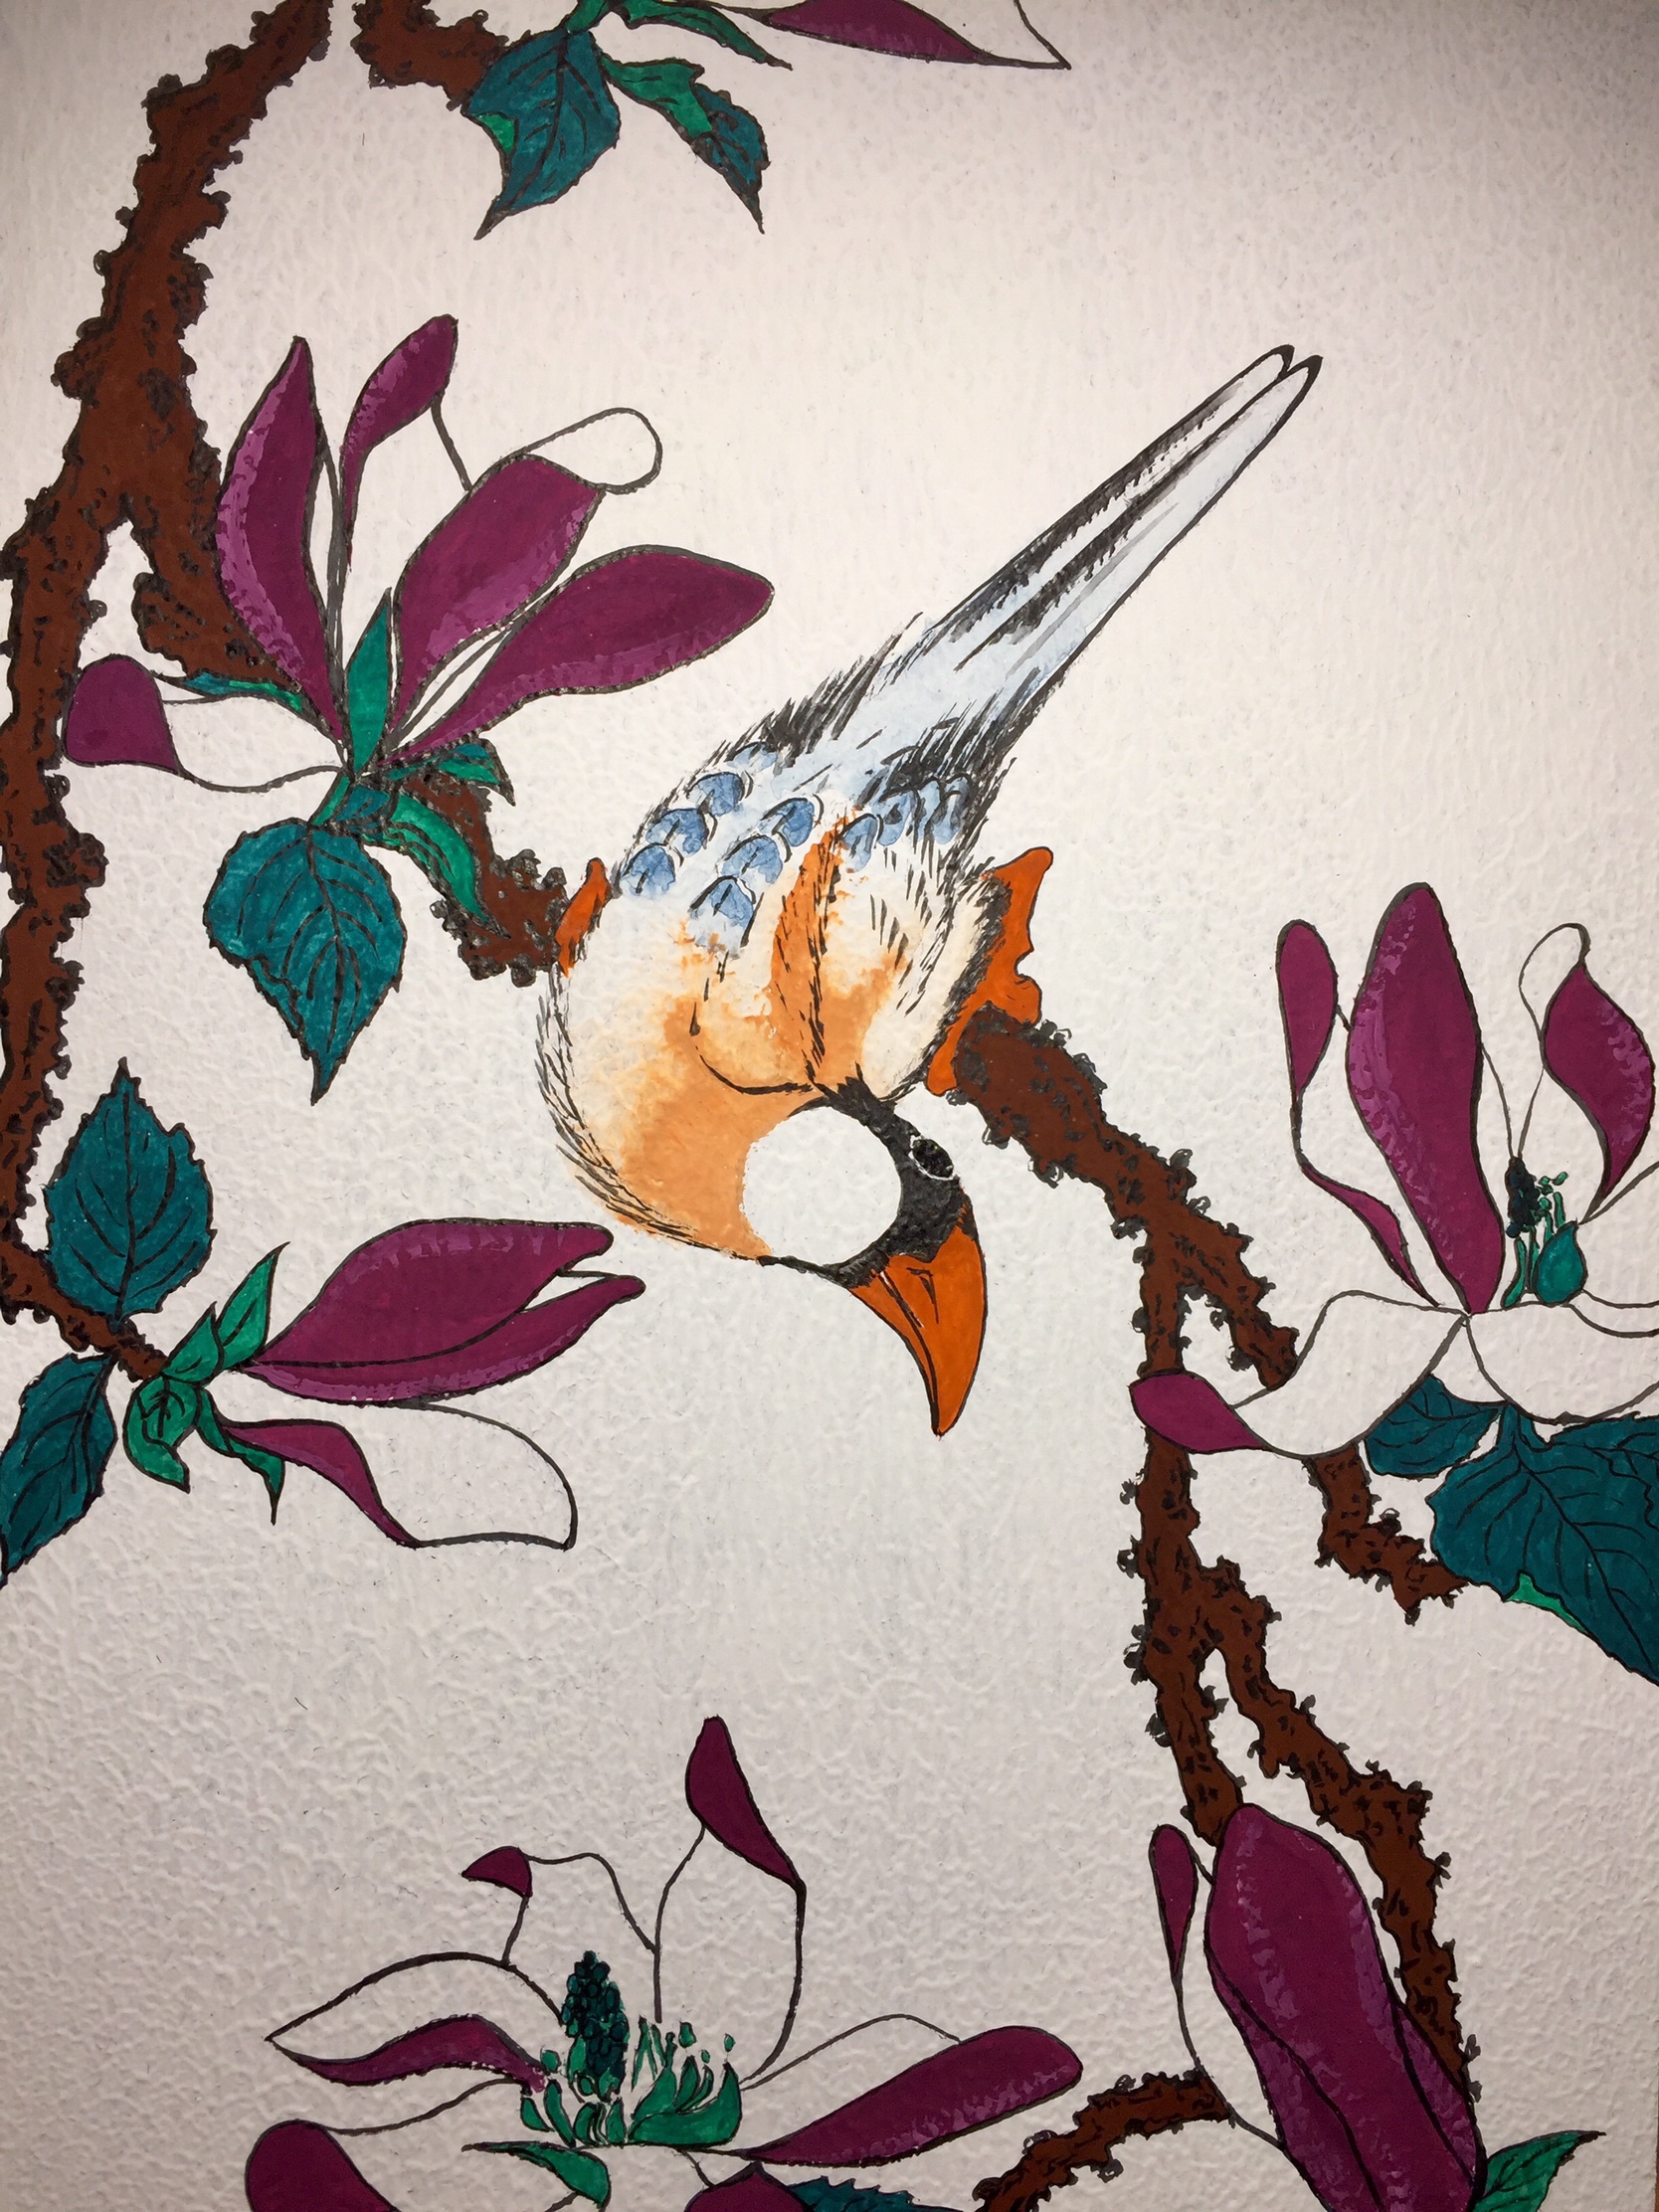 Detail of the painting showing the bird and flowers around it. With a Pentel black brushpen, I outlined everything and created details on the tail of the sparrow, the branch and leaves.